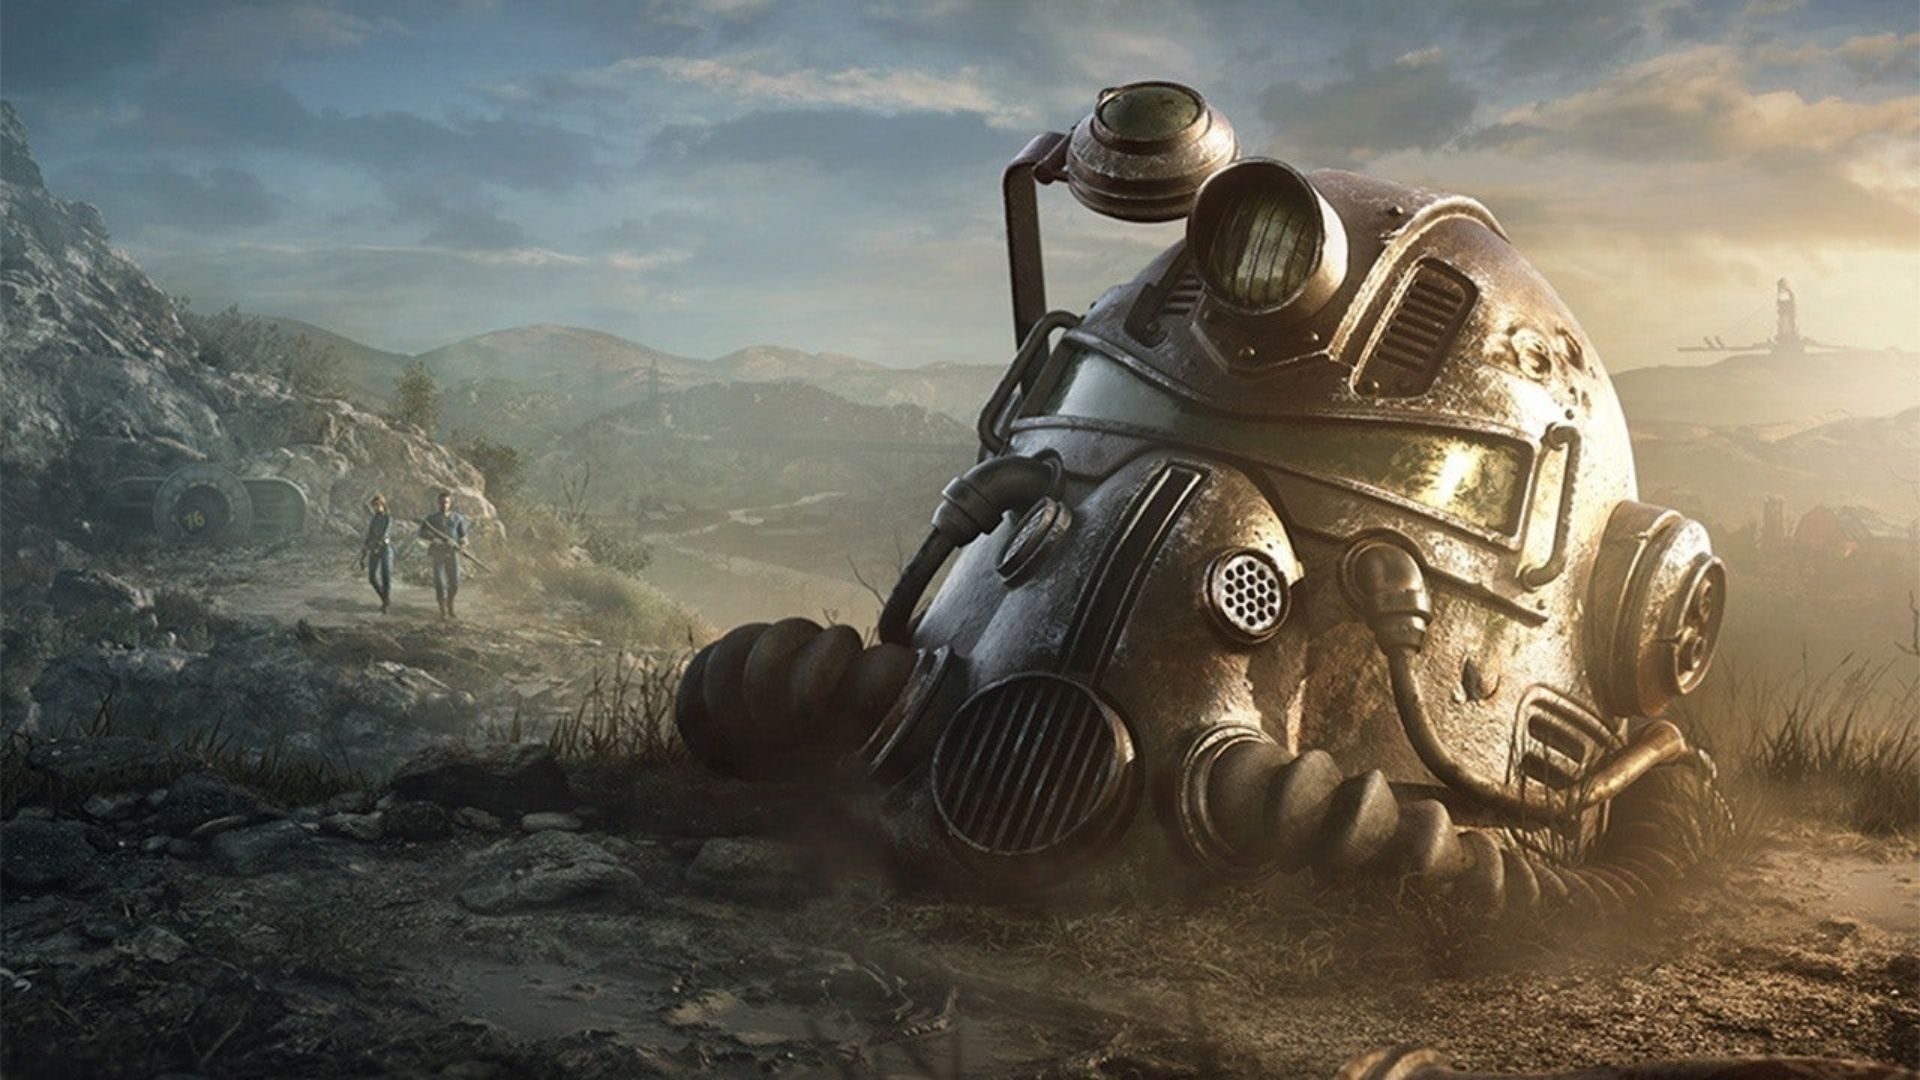 Fallout Series Had Nearly 5 Million Players in a Single Day